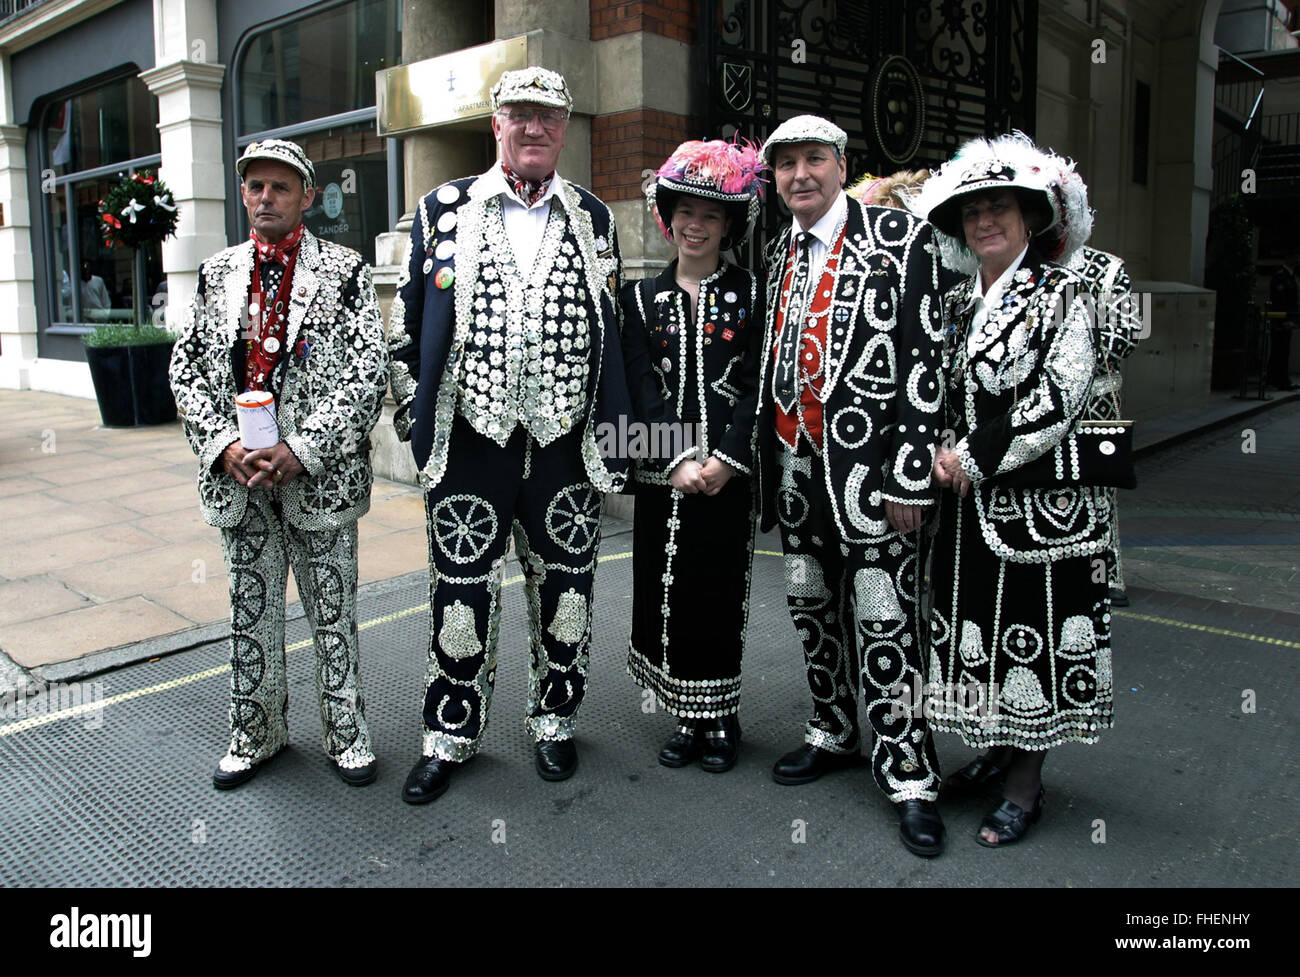 A group of pearly kings and queens pictured at Buckinham Gate on the way to celebrate Queen Elizabeth II's Golden Jubilee. Celebrations took place across the United Kingdom with the centrepiece a parade and fireworks at Buckingham Palace, the Queen's London residency. Queen Elizabeth ascended to the British throne in 1952 upon the death of her father, King George VI. Stock Photo